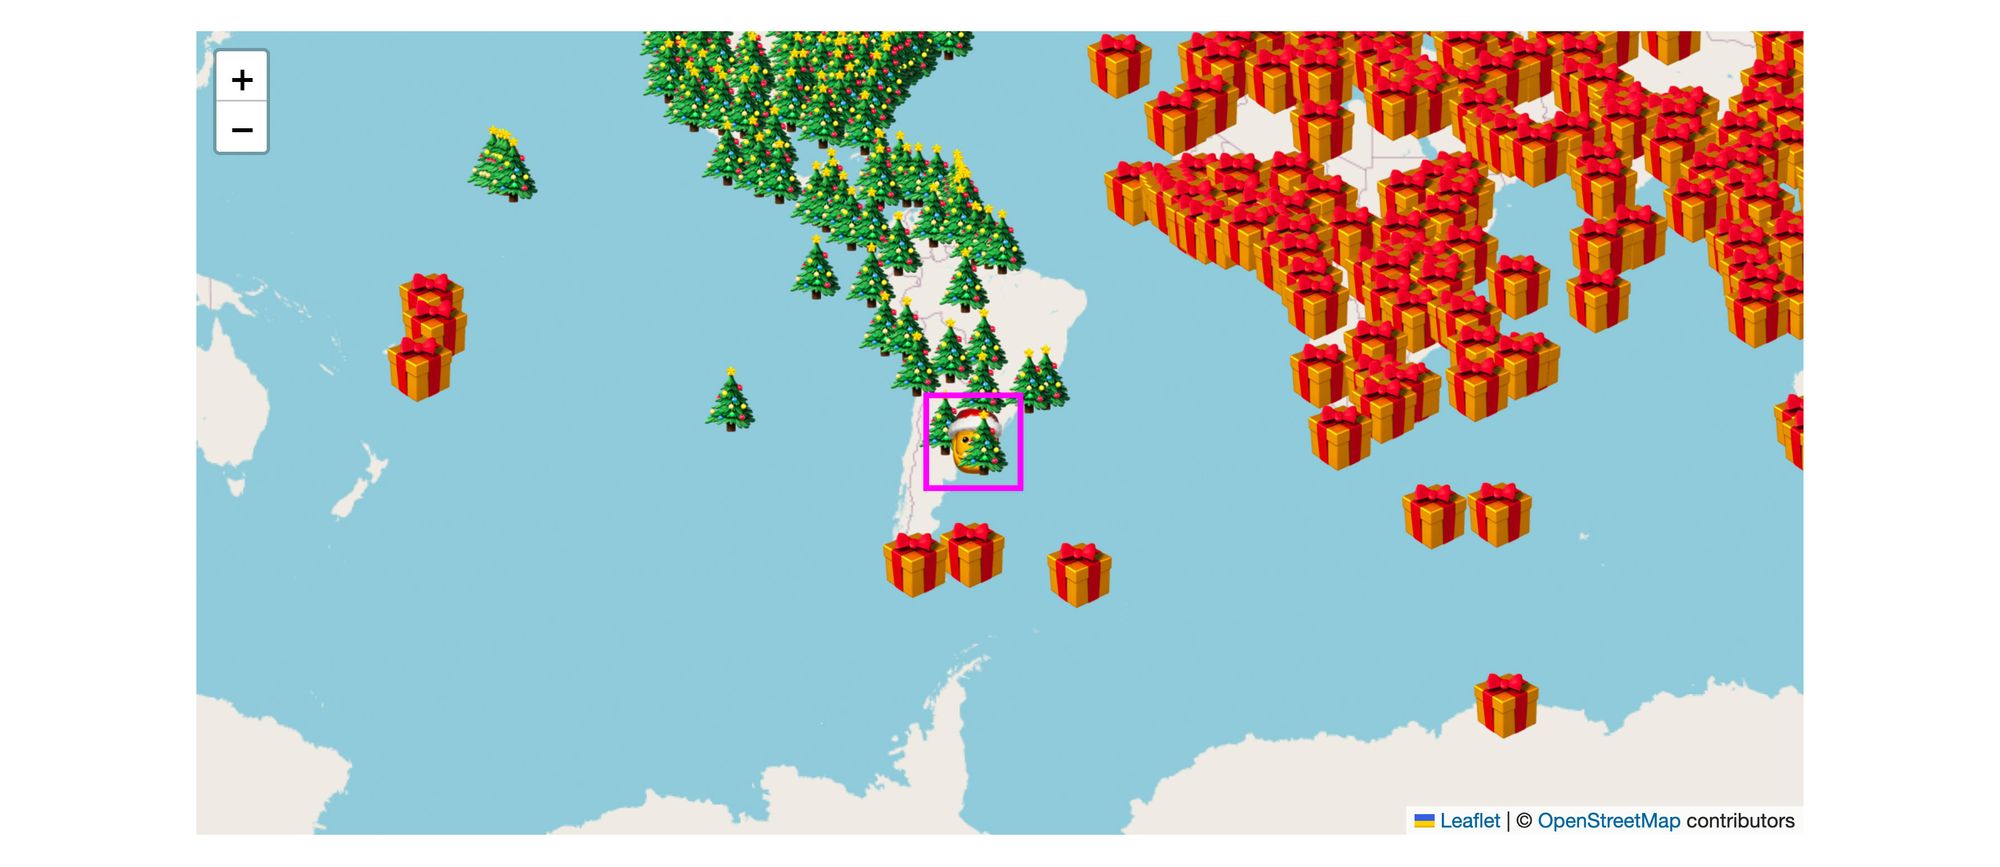 Santa covered by a tree icon on the map